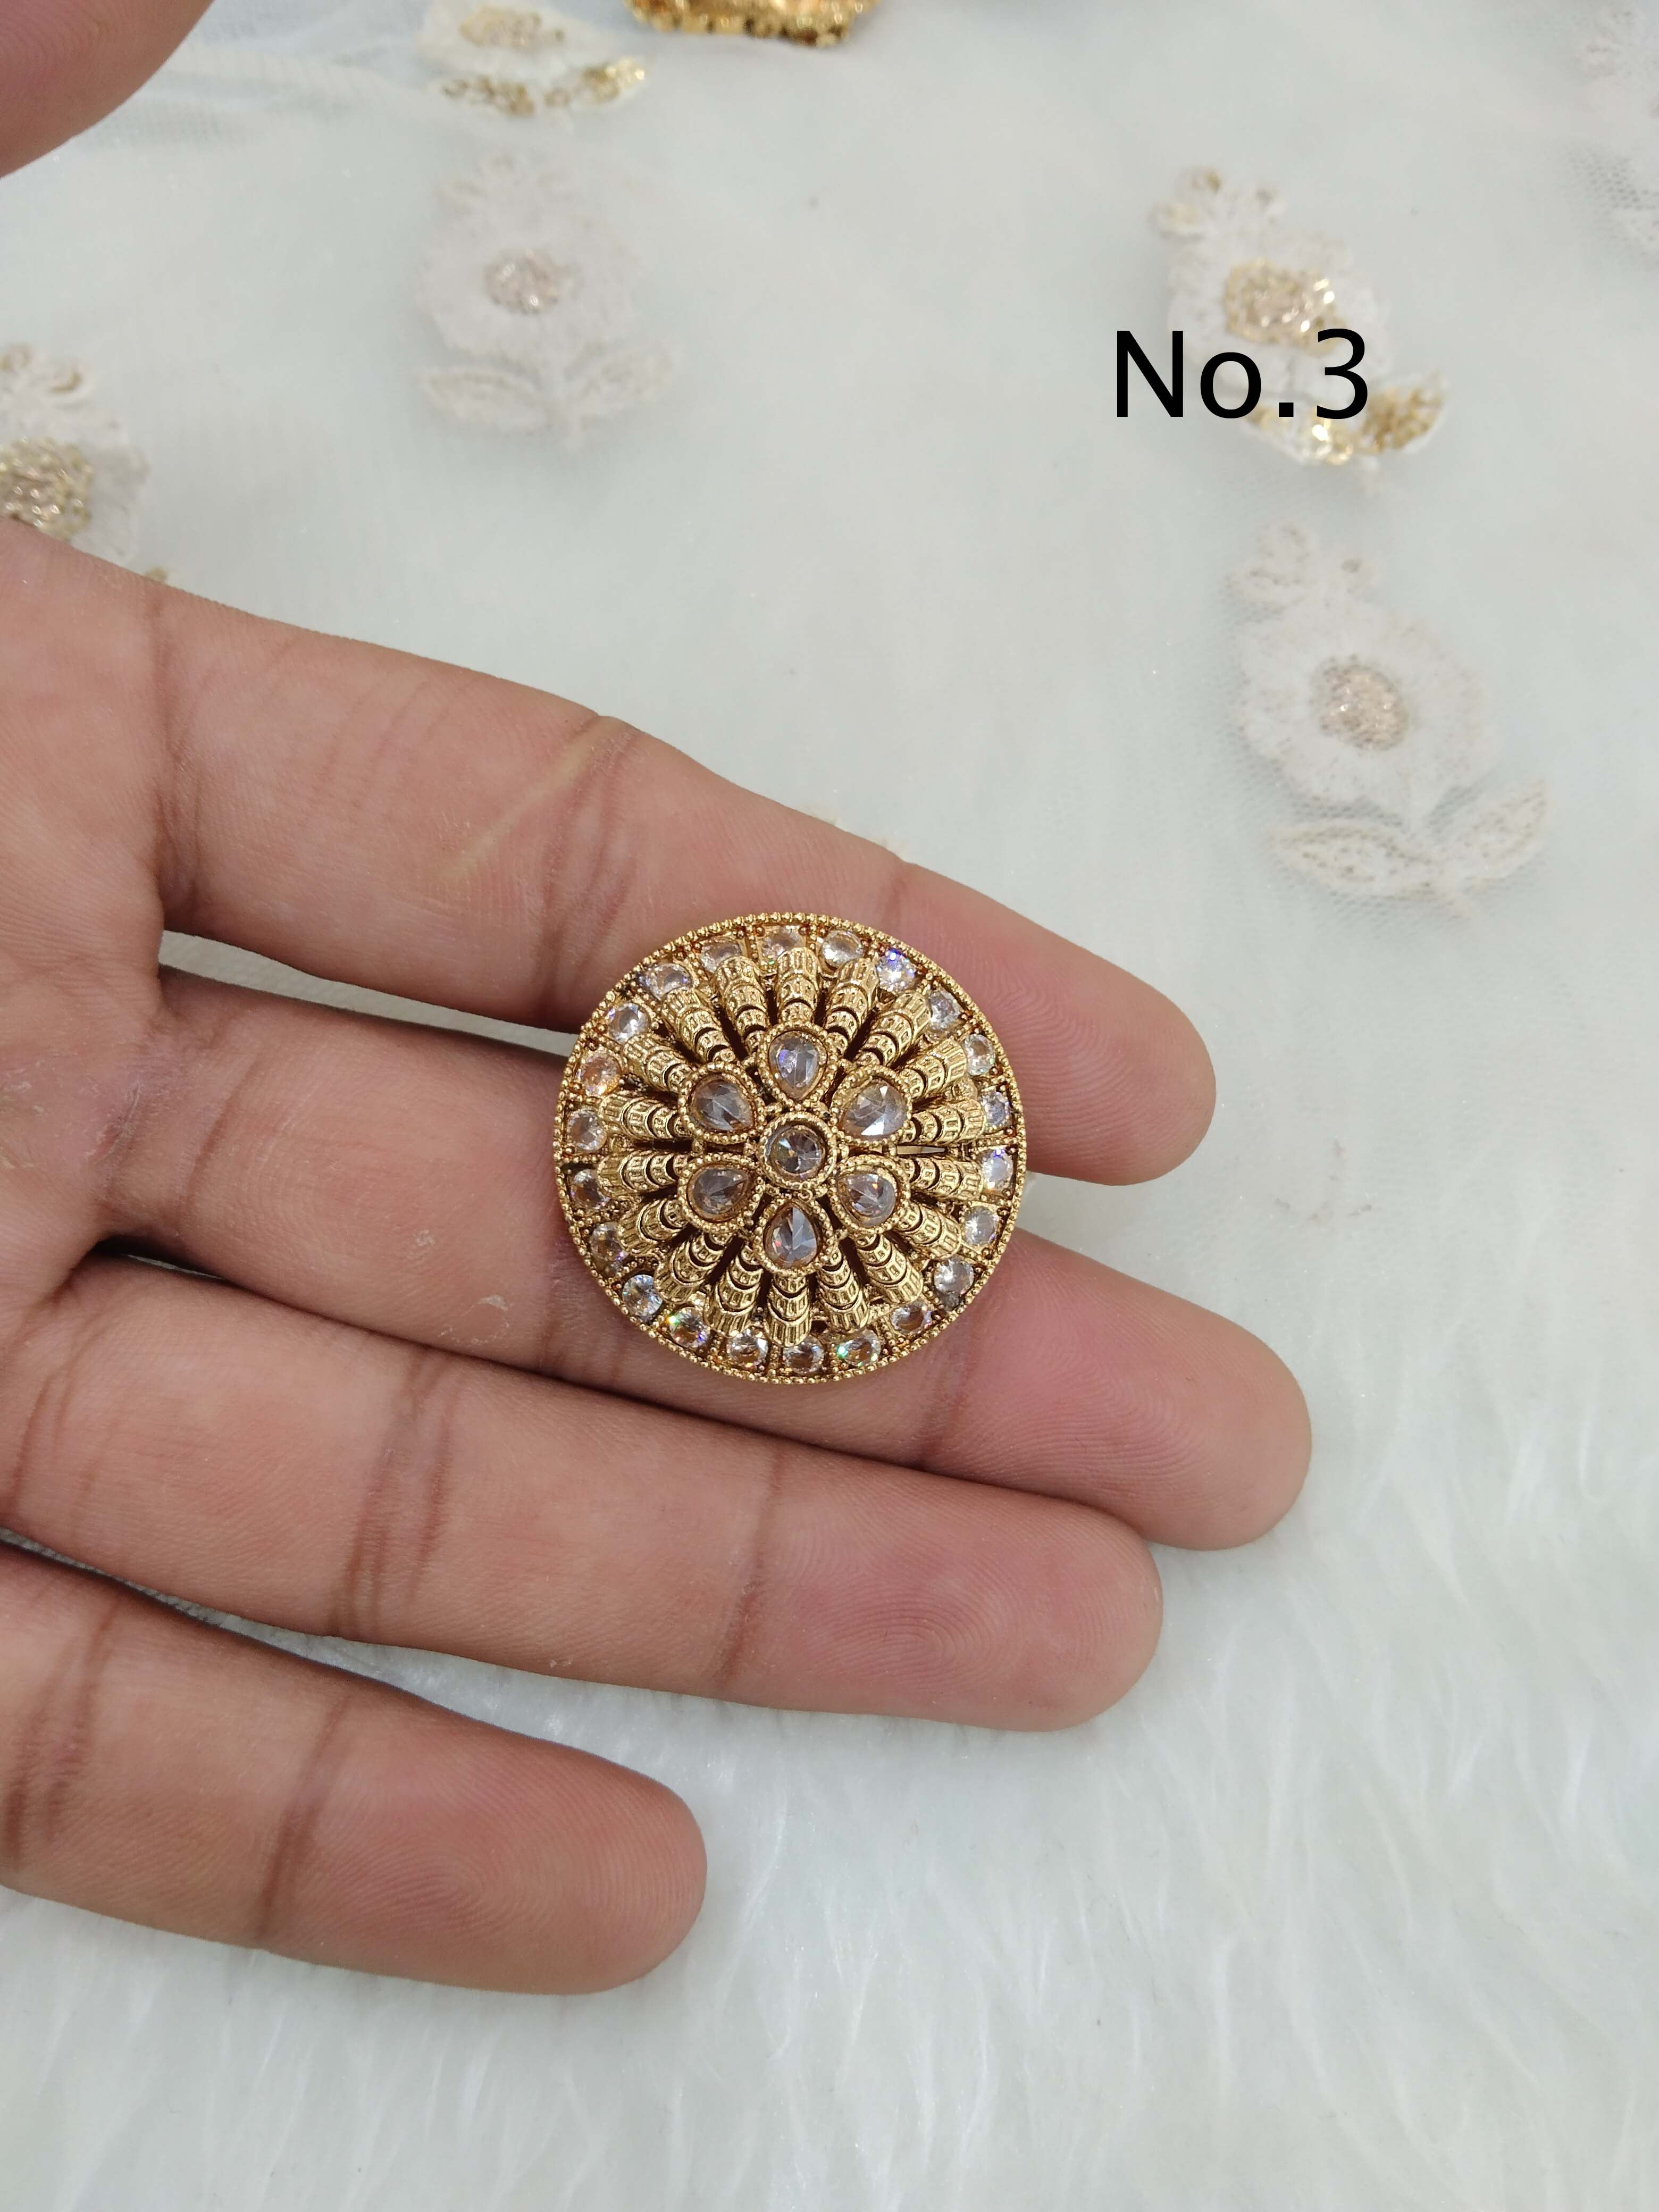 New Fashion Stainless Steel Gold Silver Color Rings for Women Irregular  Round Leaf Finger Ring Jewelry Party Gift Wholesale